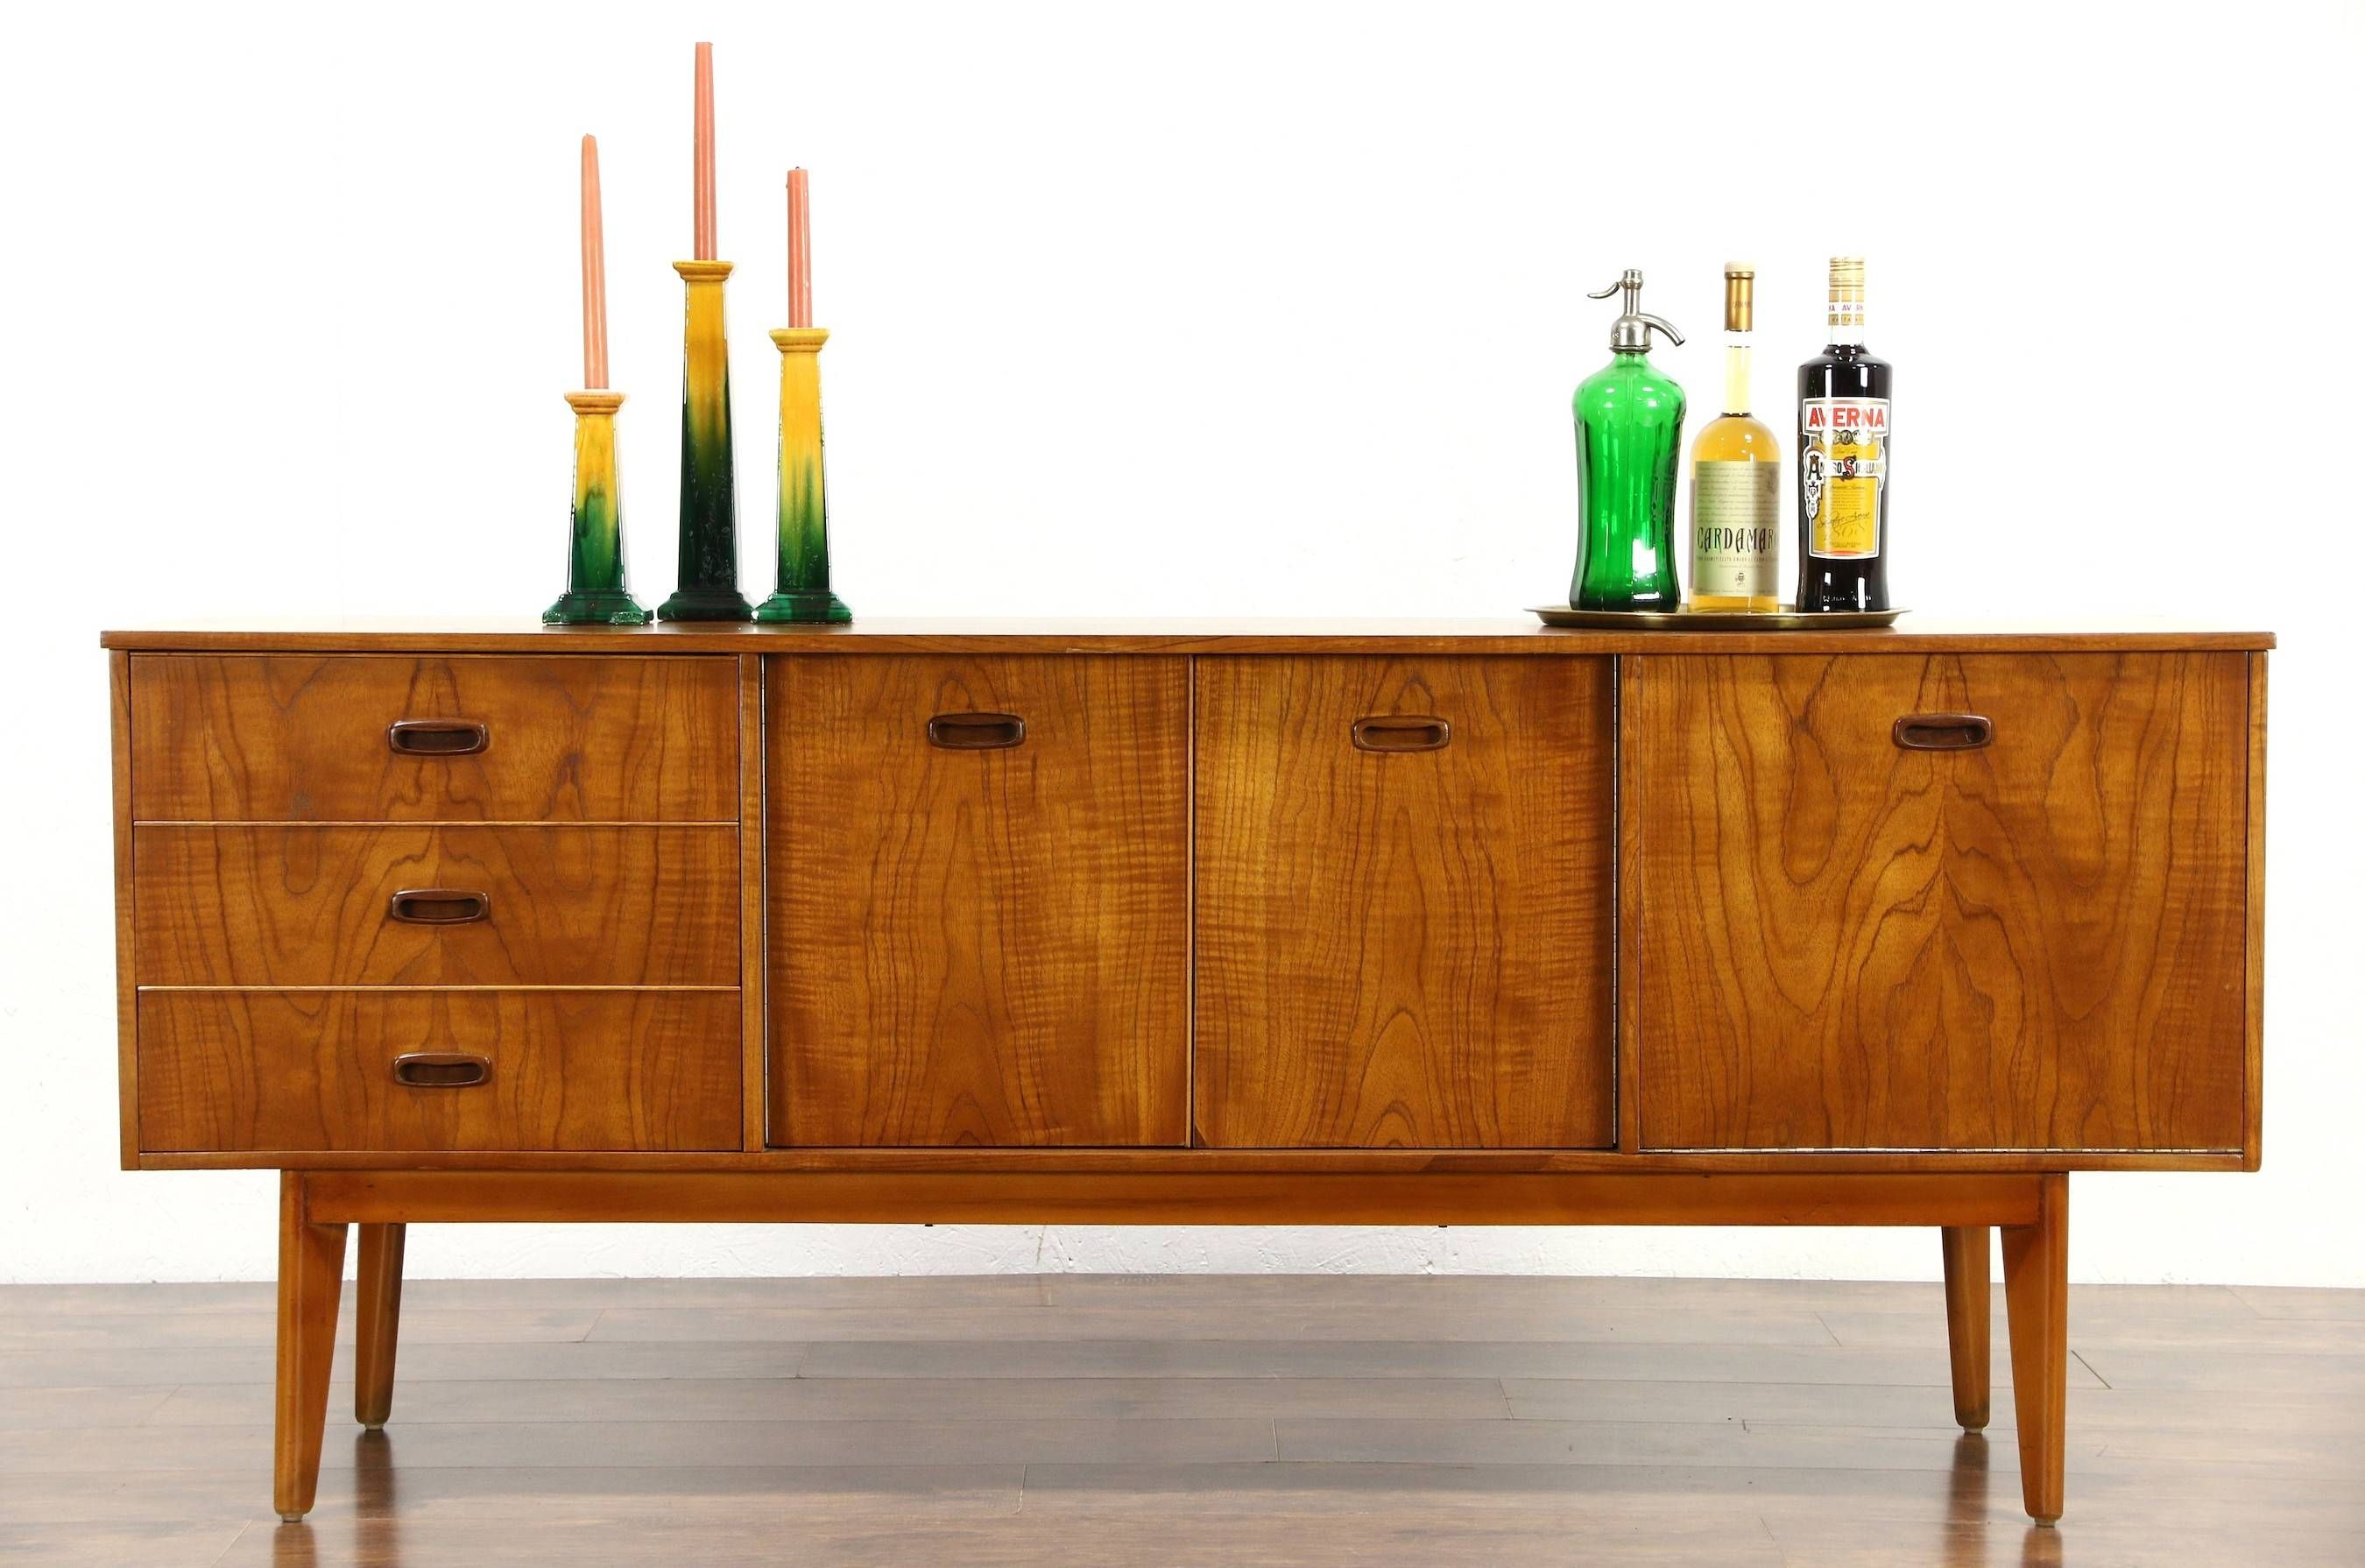 Sold – Midcentury Modern Teak 1960 Vintage Bar Cabinet Sideboard With Best And Newest Sideboard Bar Cabinet (View 4 of 15)